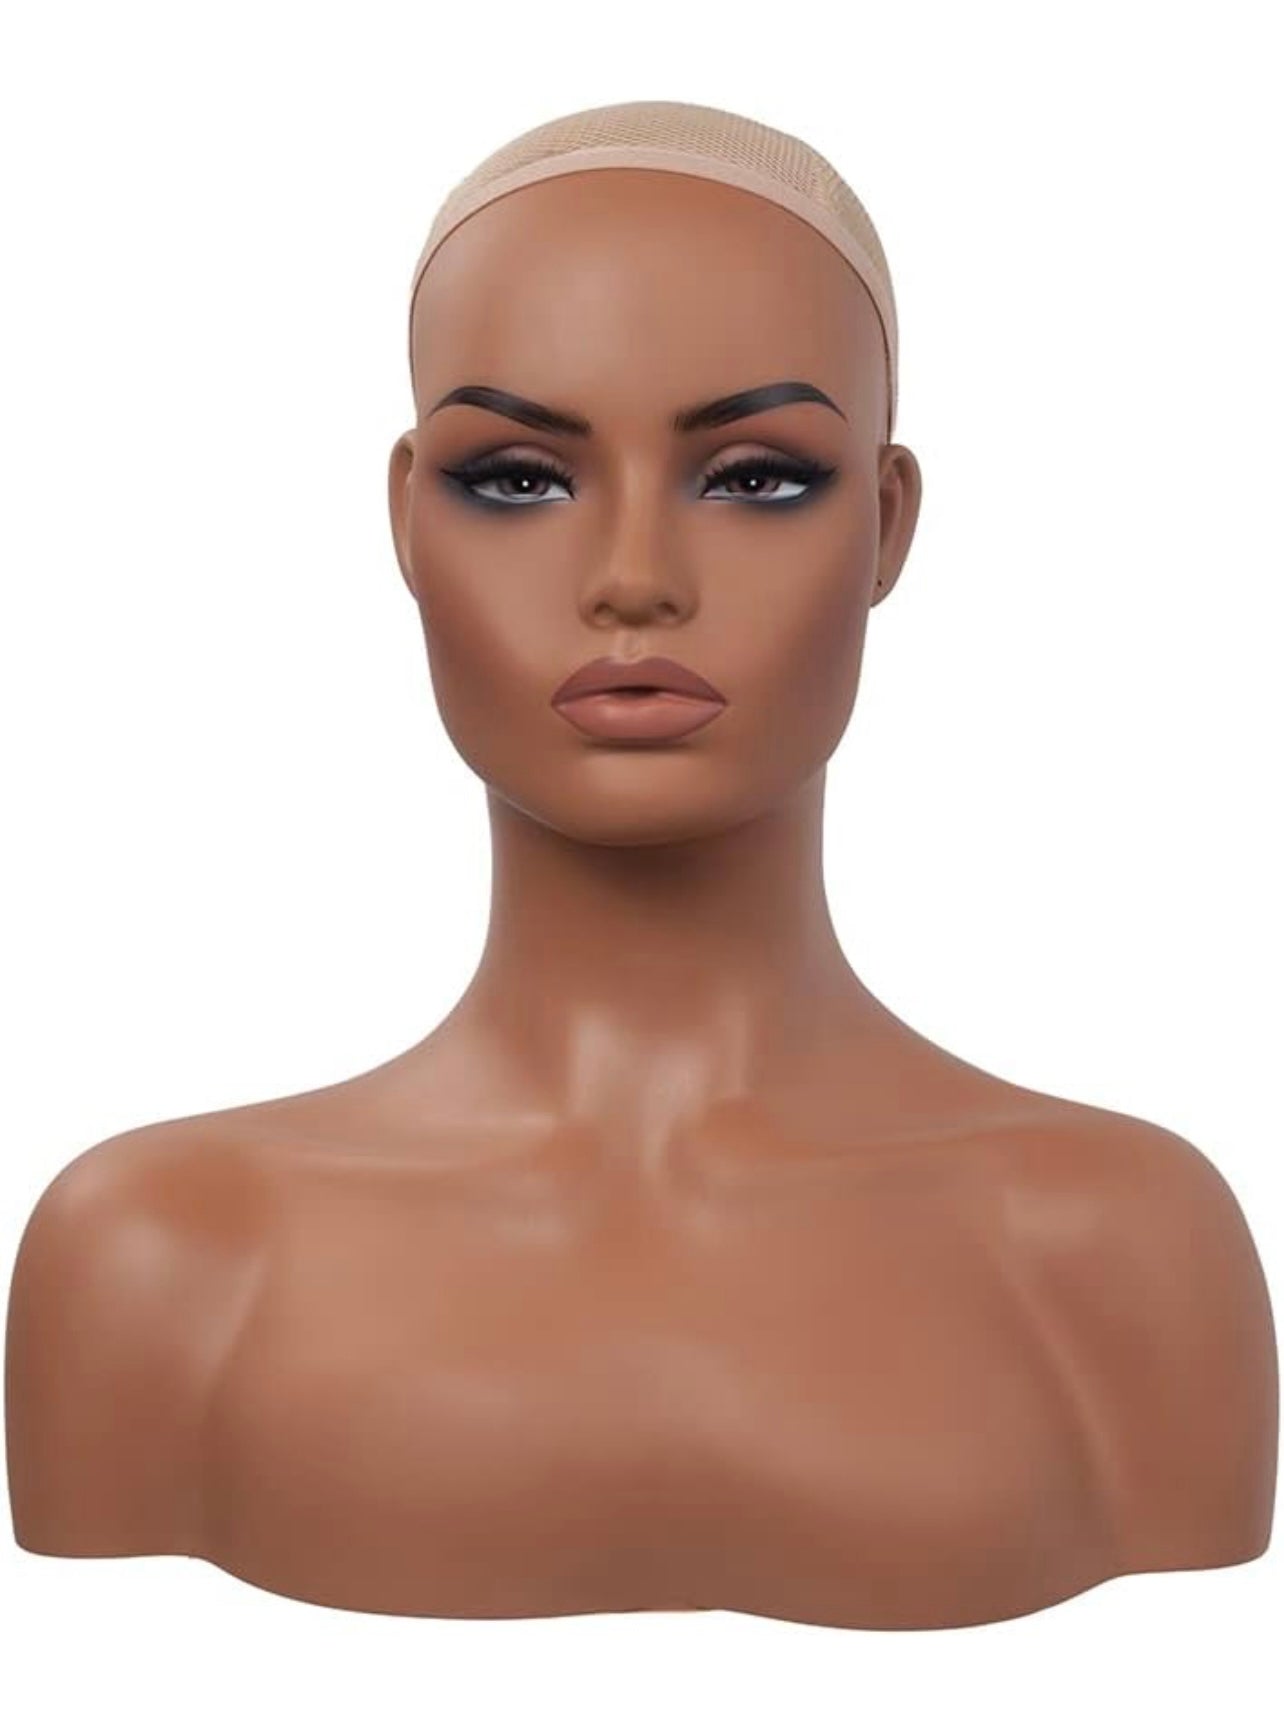 Create Your own Dollx